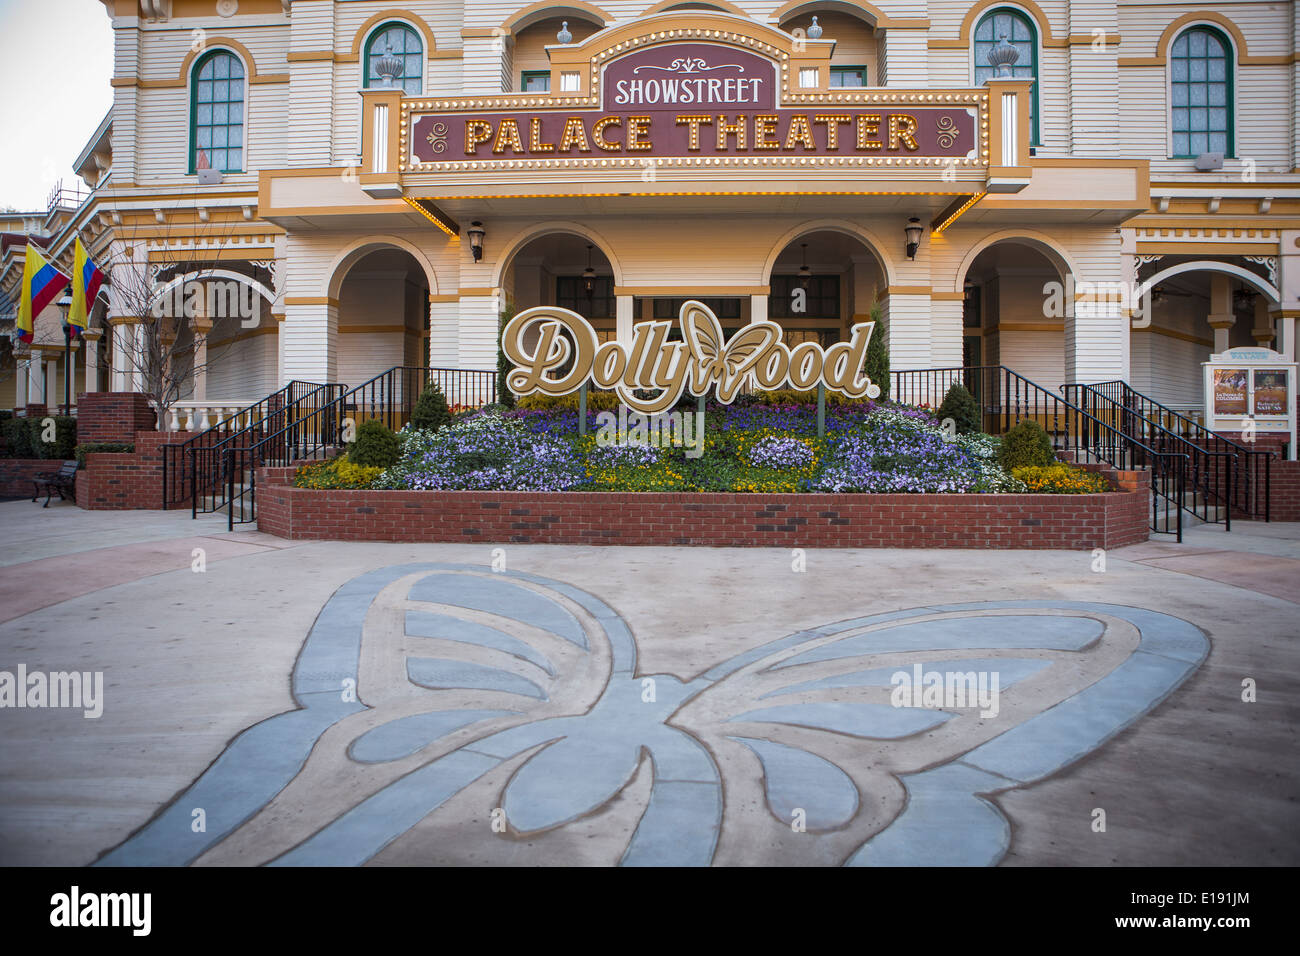 Showstreet Palace Theater ist im Themenpark Dollywood in Pigeon Forge, Tennessee abgebildet. Stockfoto